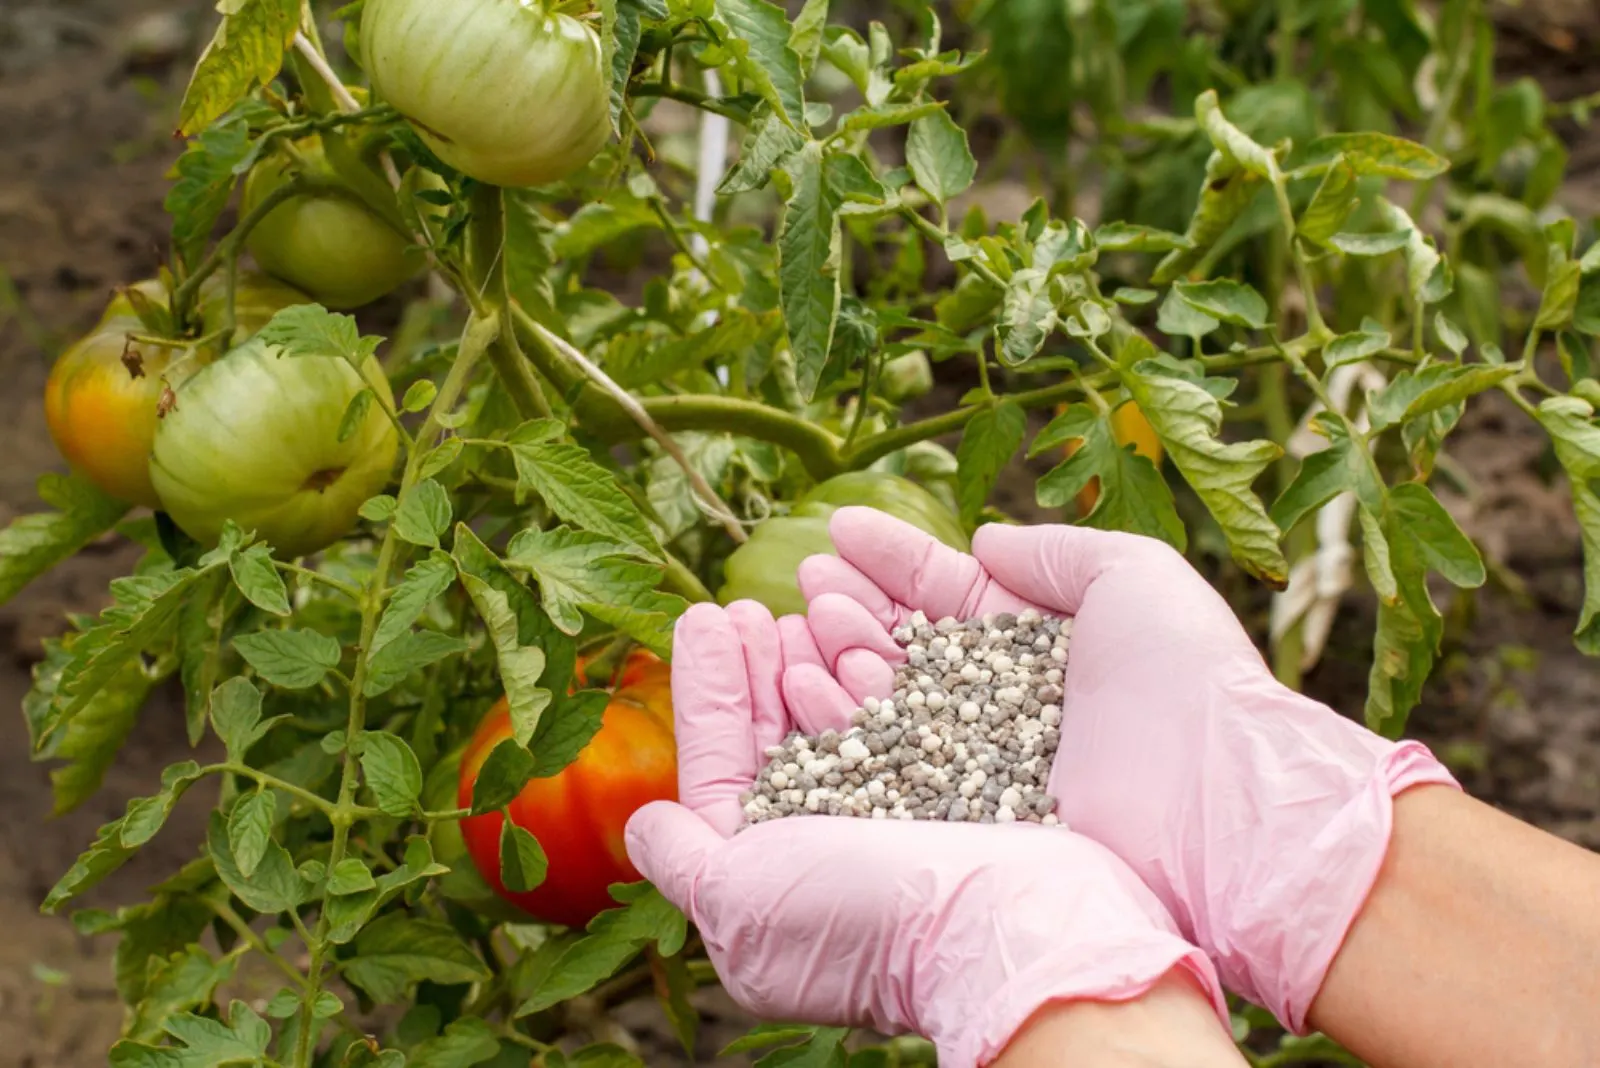 Get The Biggest Tomatoes With These Fertilization Tips